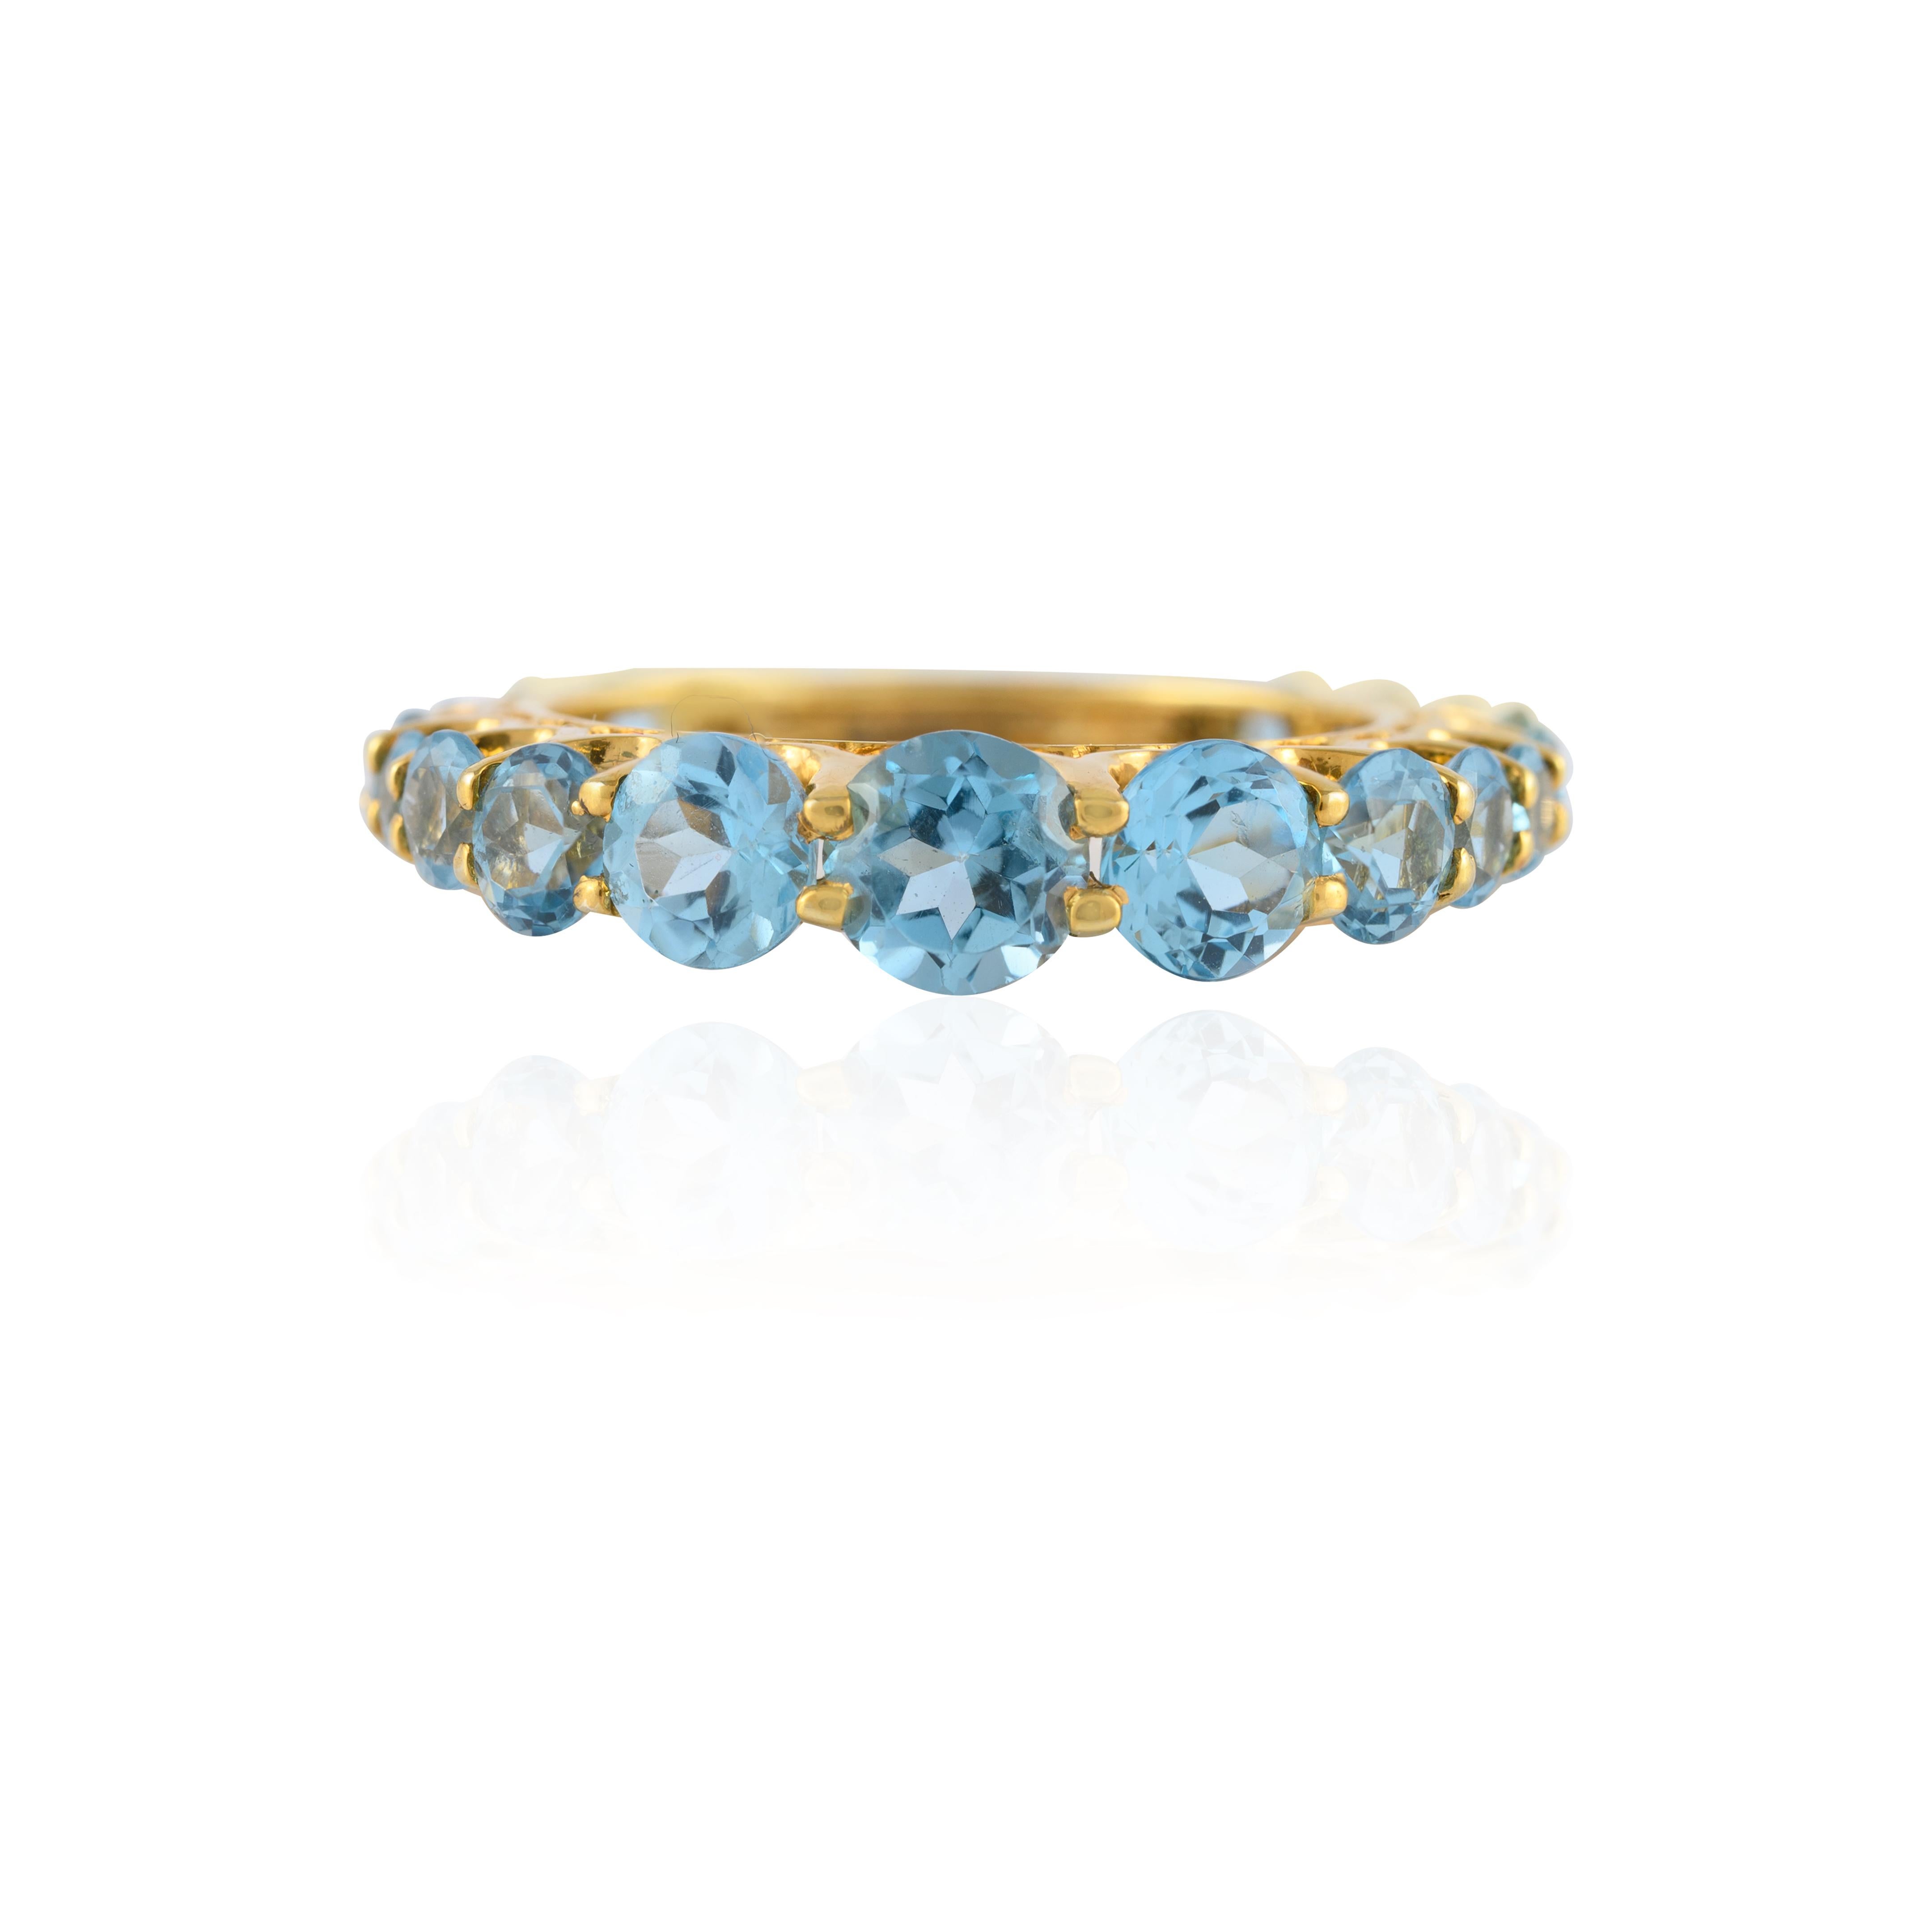 For Sale:  Unique 14k Yellow Gold 3.09 Carat Blue Topaz Half Eternity Band Ring 2